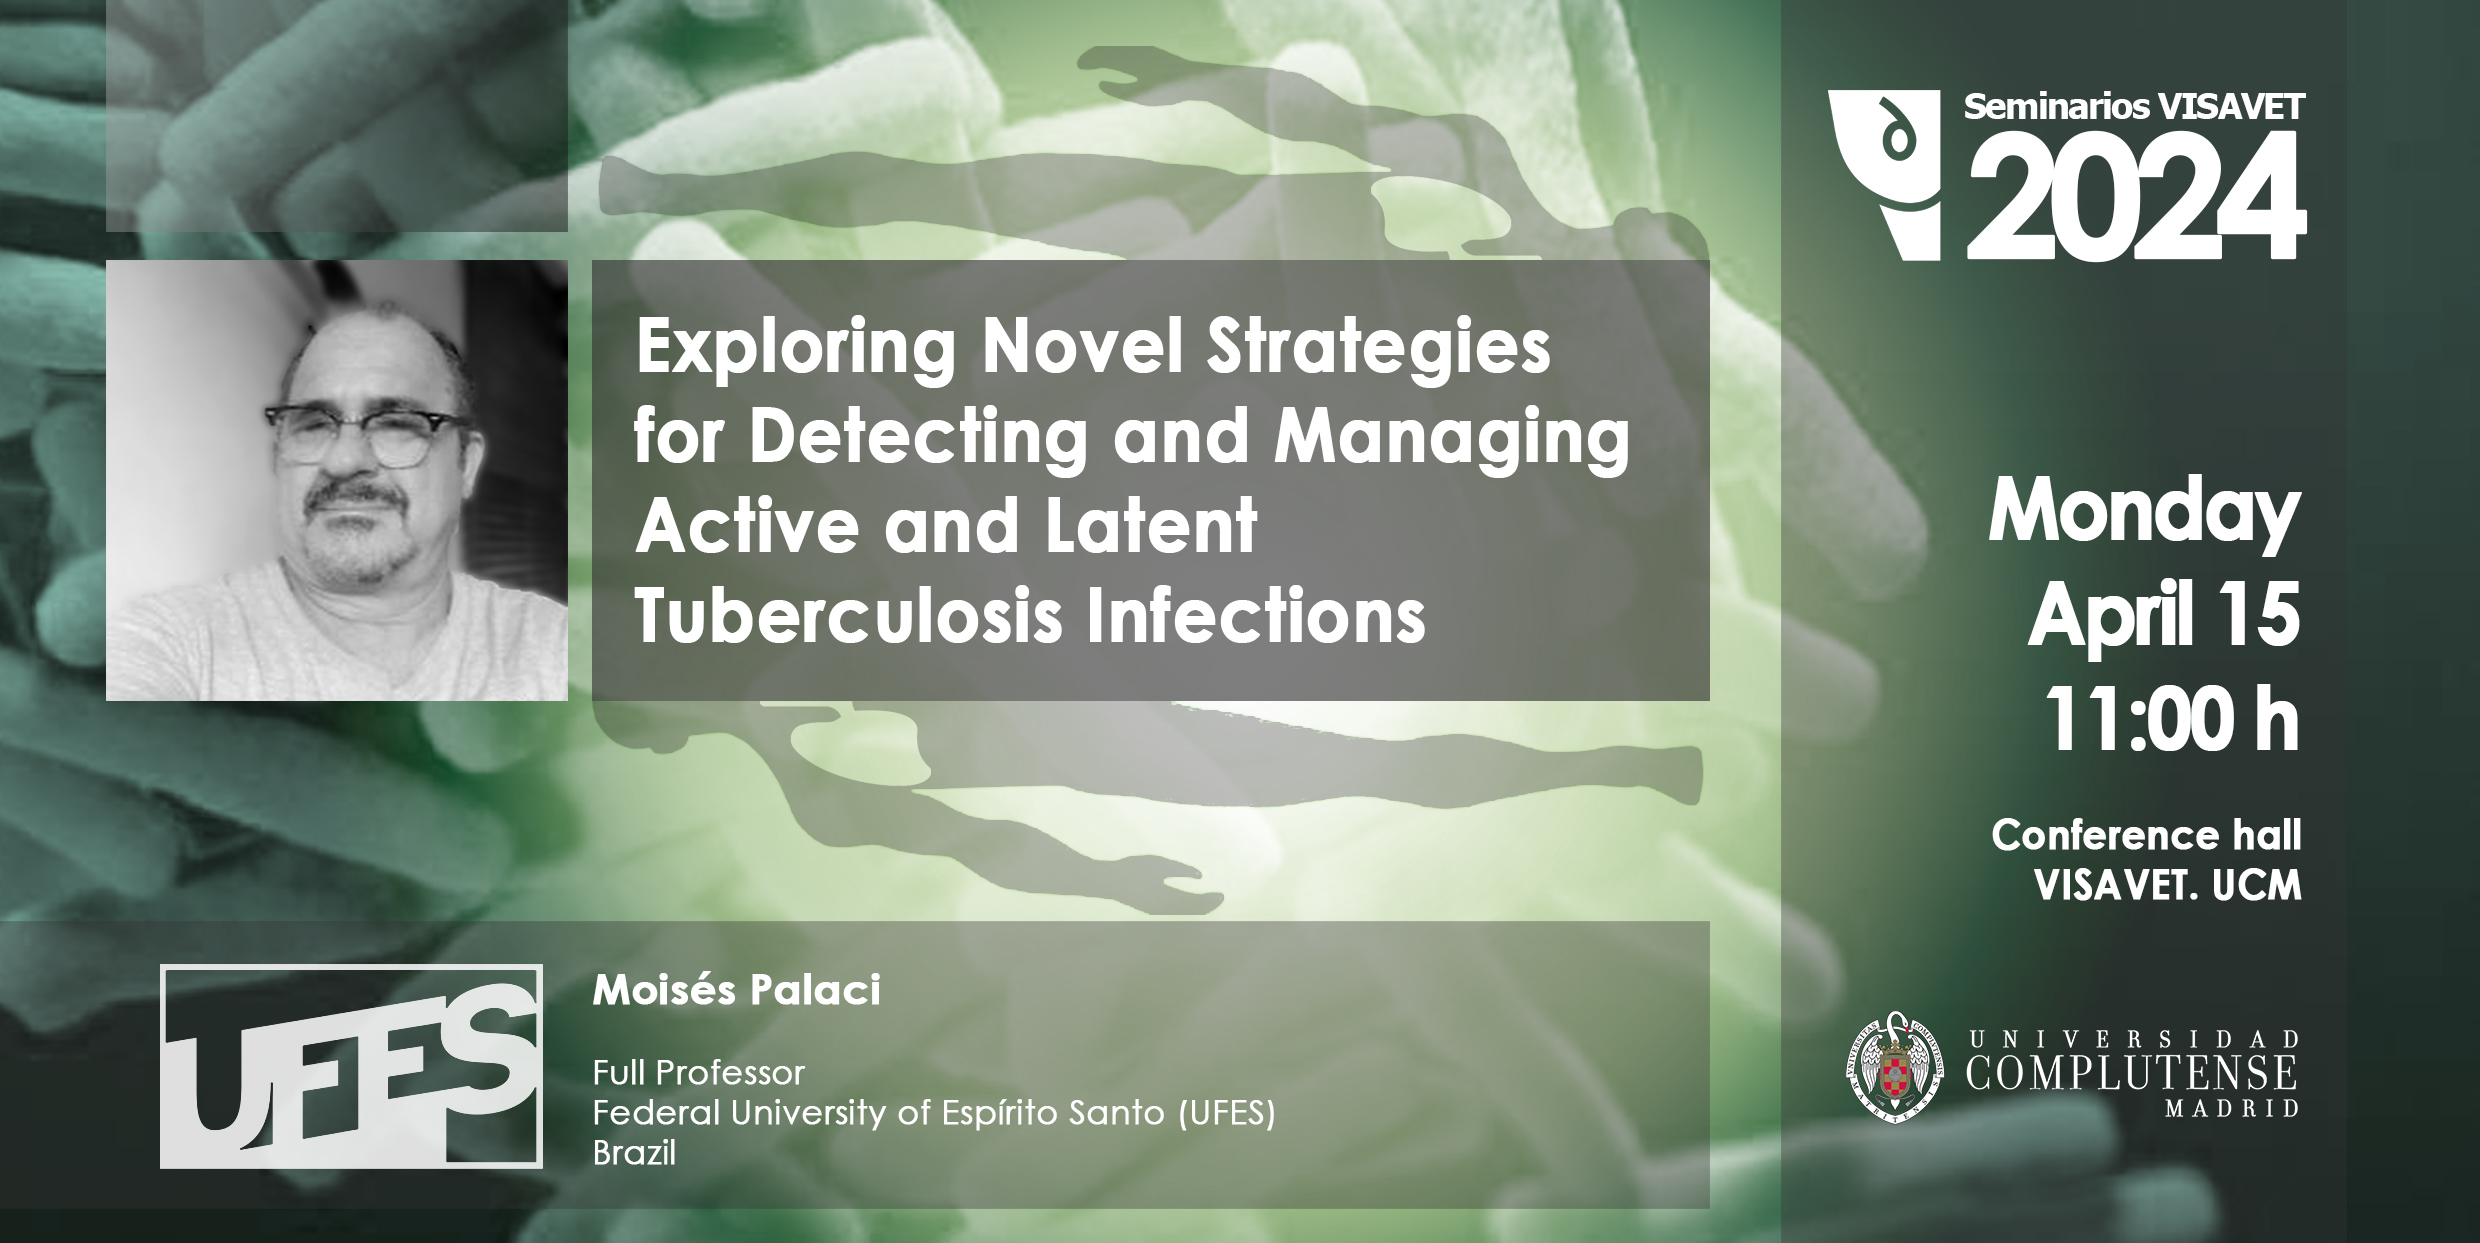 Moiss Palaci. UFES. Exploring Novel Strategies for Detecting and Managing Active and Latent Tuberculosis Infections